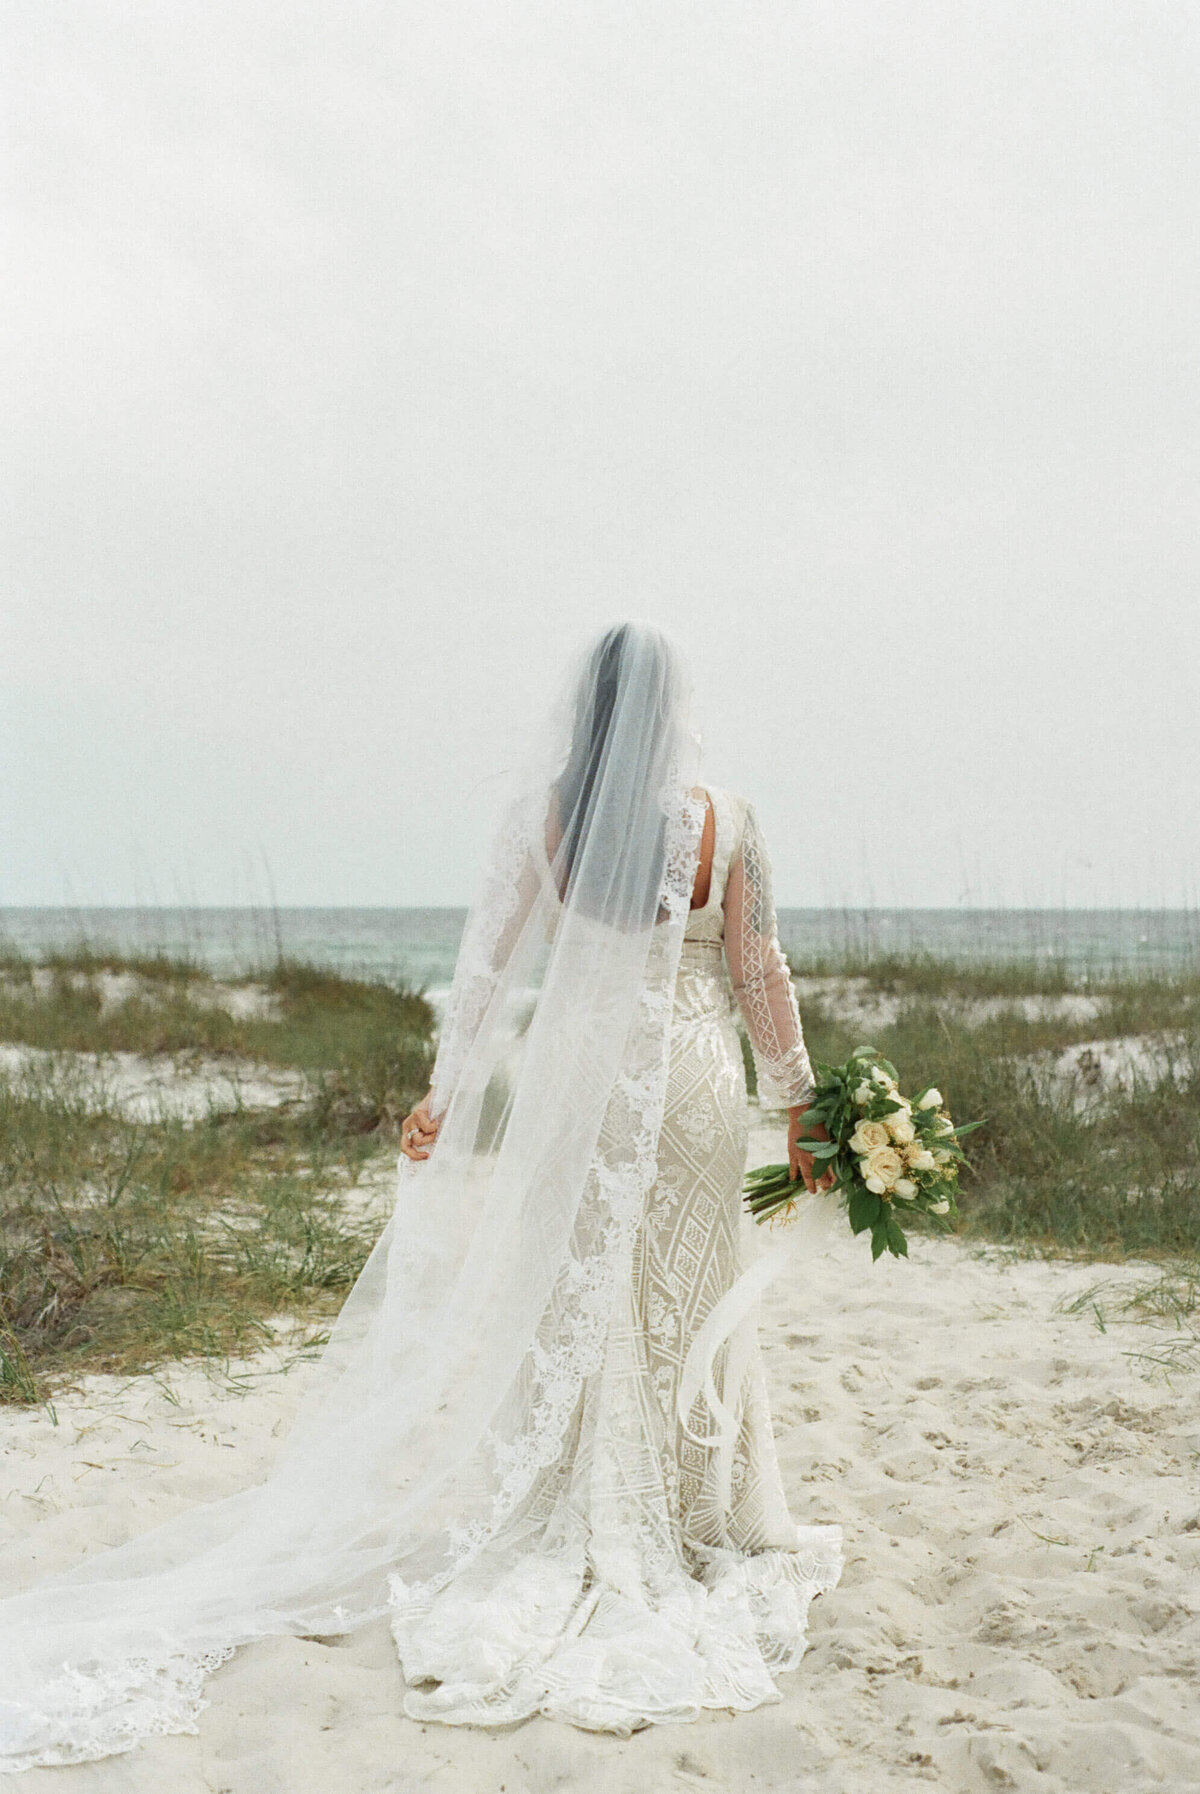 behind shot of asian bride in bridal dress and veil walks on beach path - taken by panama city fl photographer Brittney Stanley